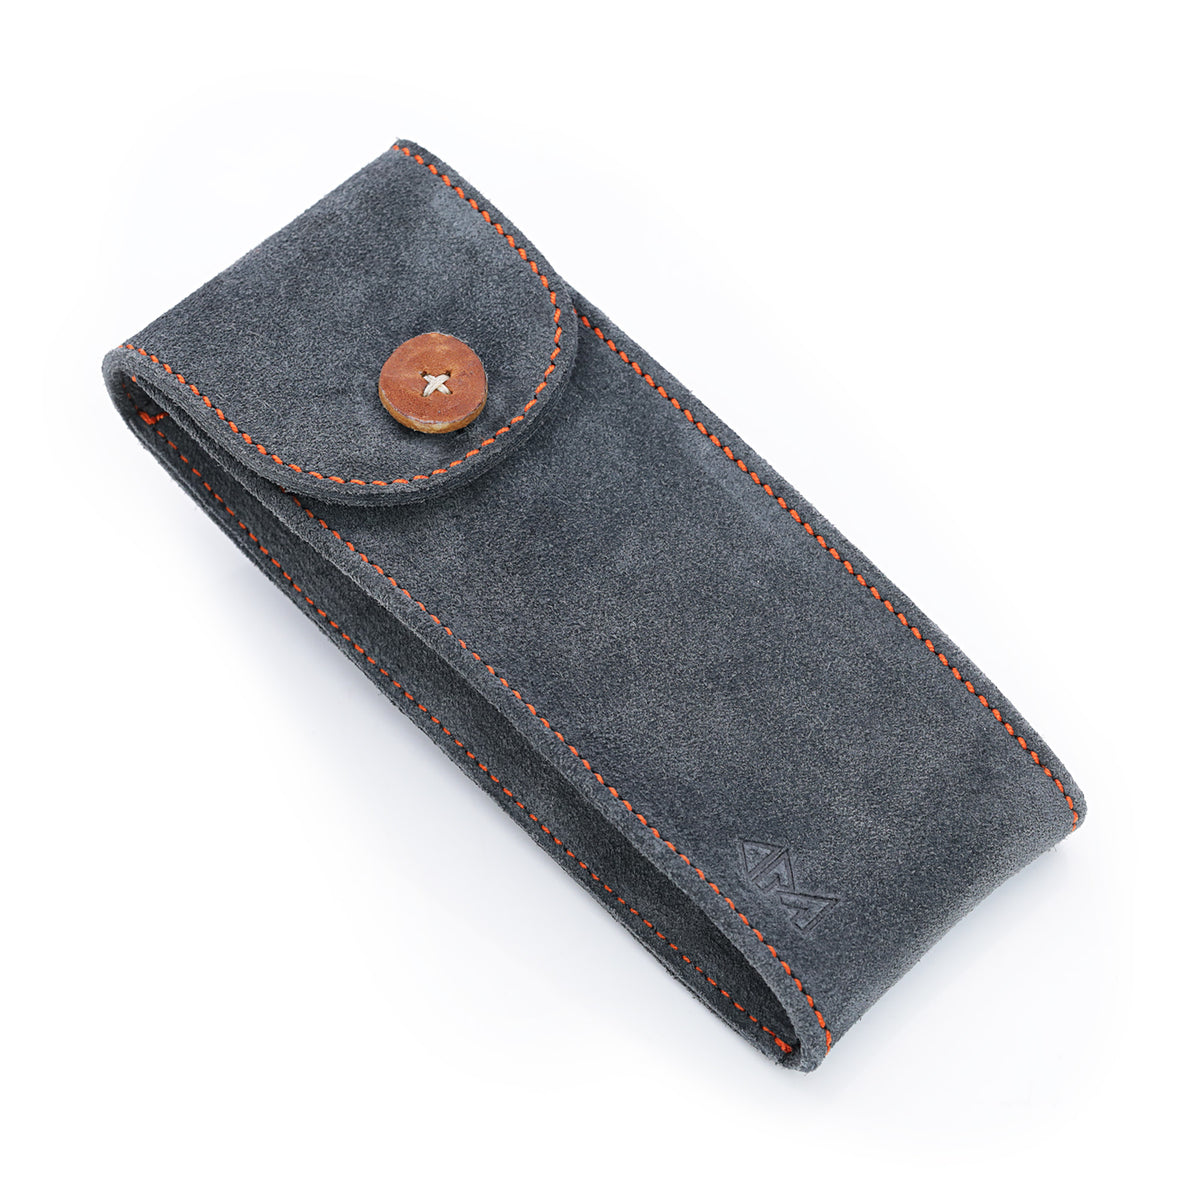 MT-3 Grey Suede Leather Travel Watch Pouch for Watch Strap, Long Size